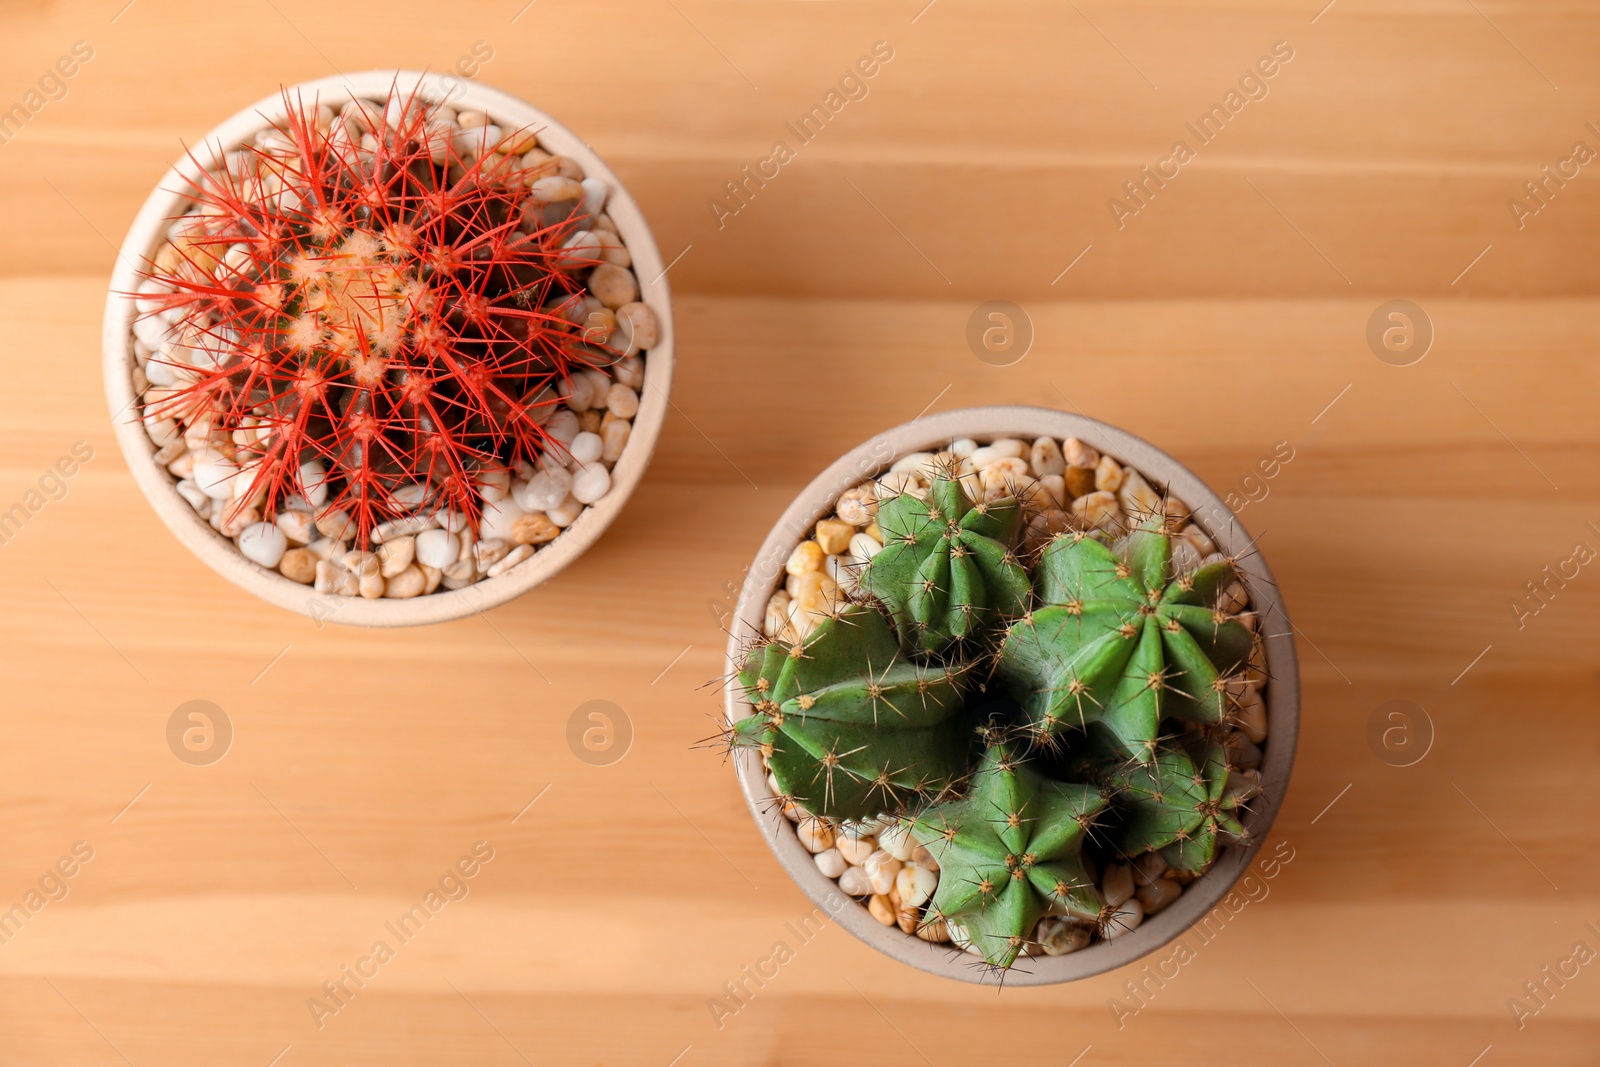 Photo of Beautiful cacti on wooden background, top view